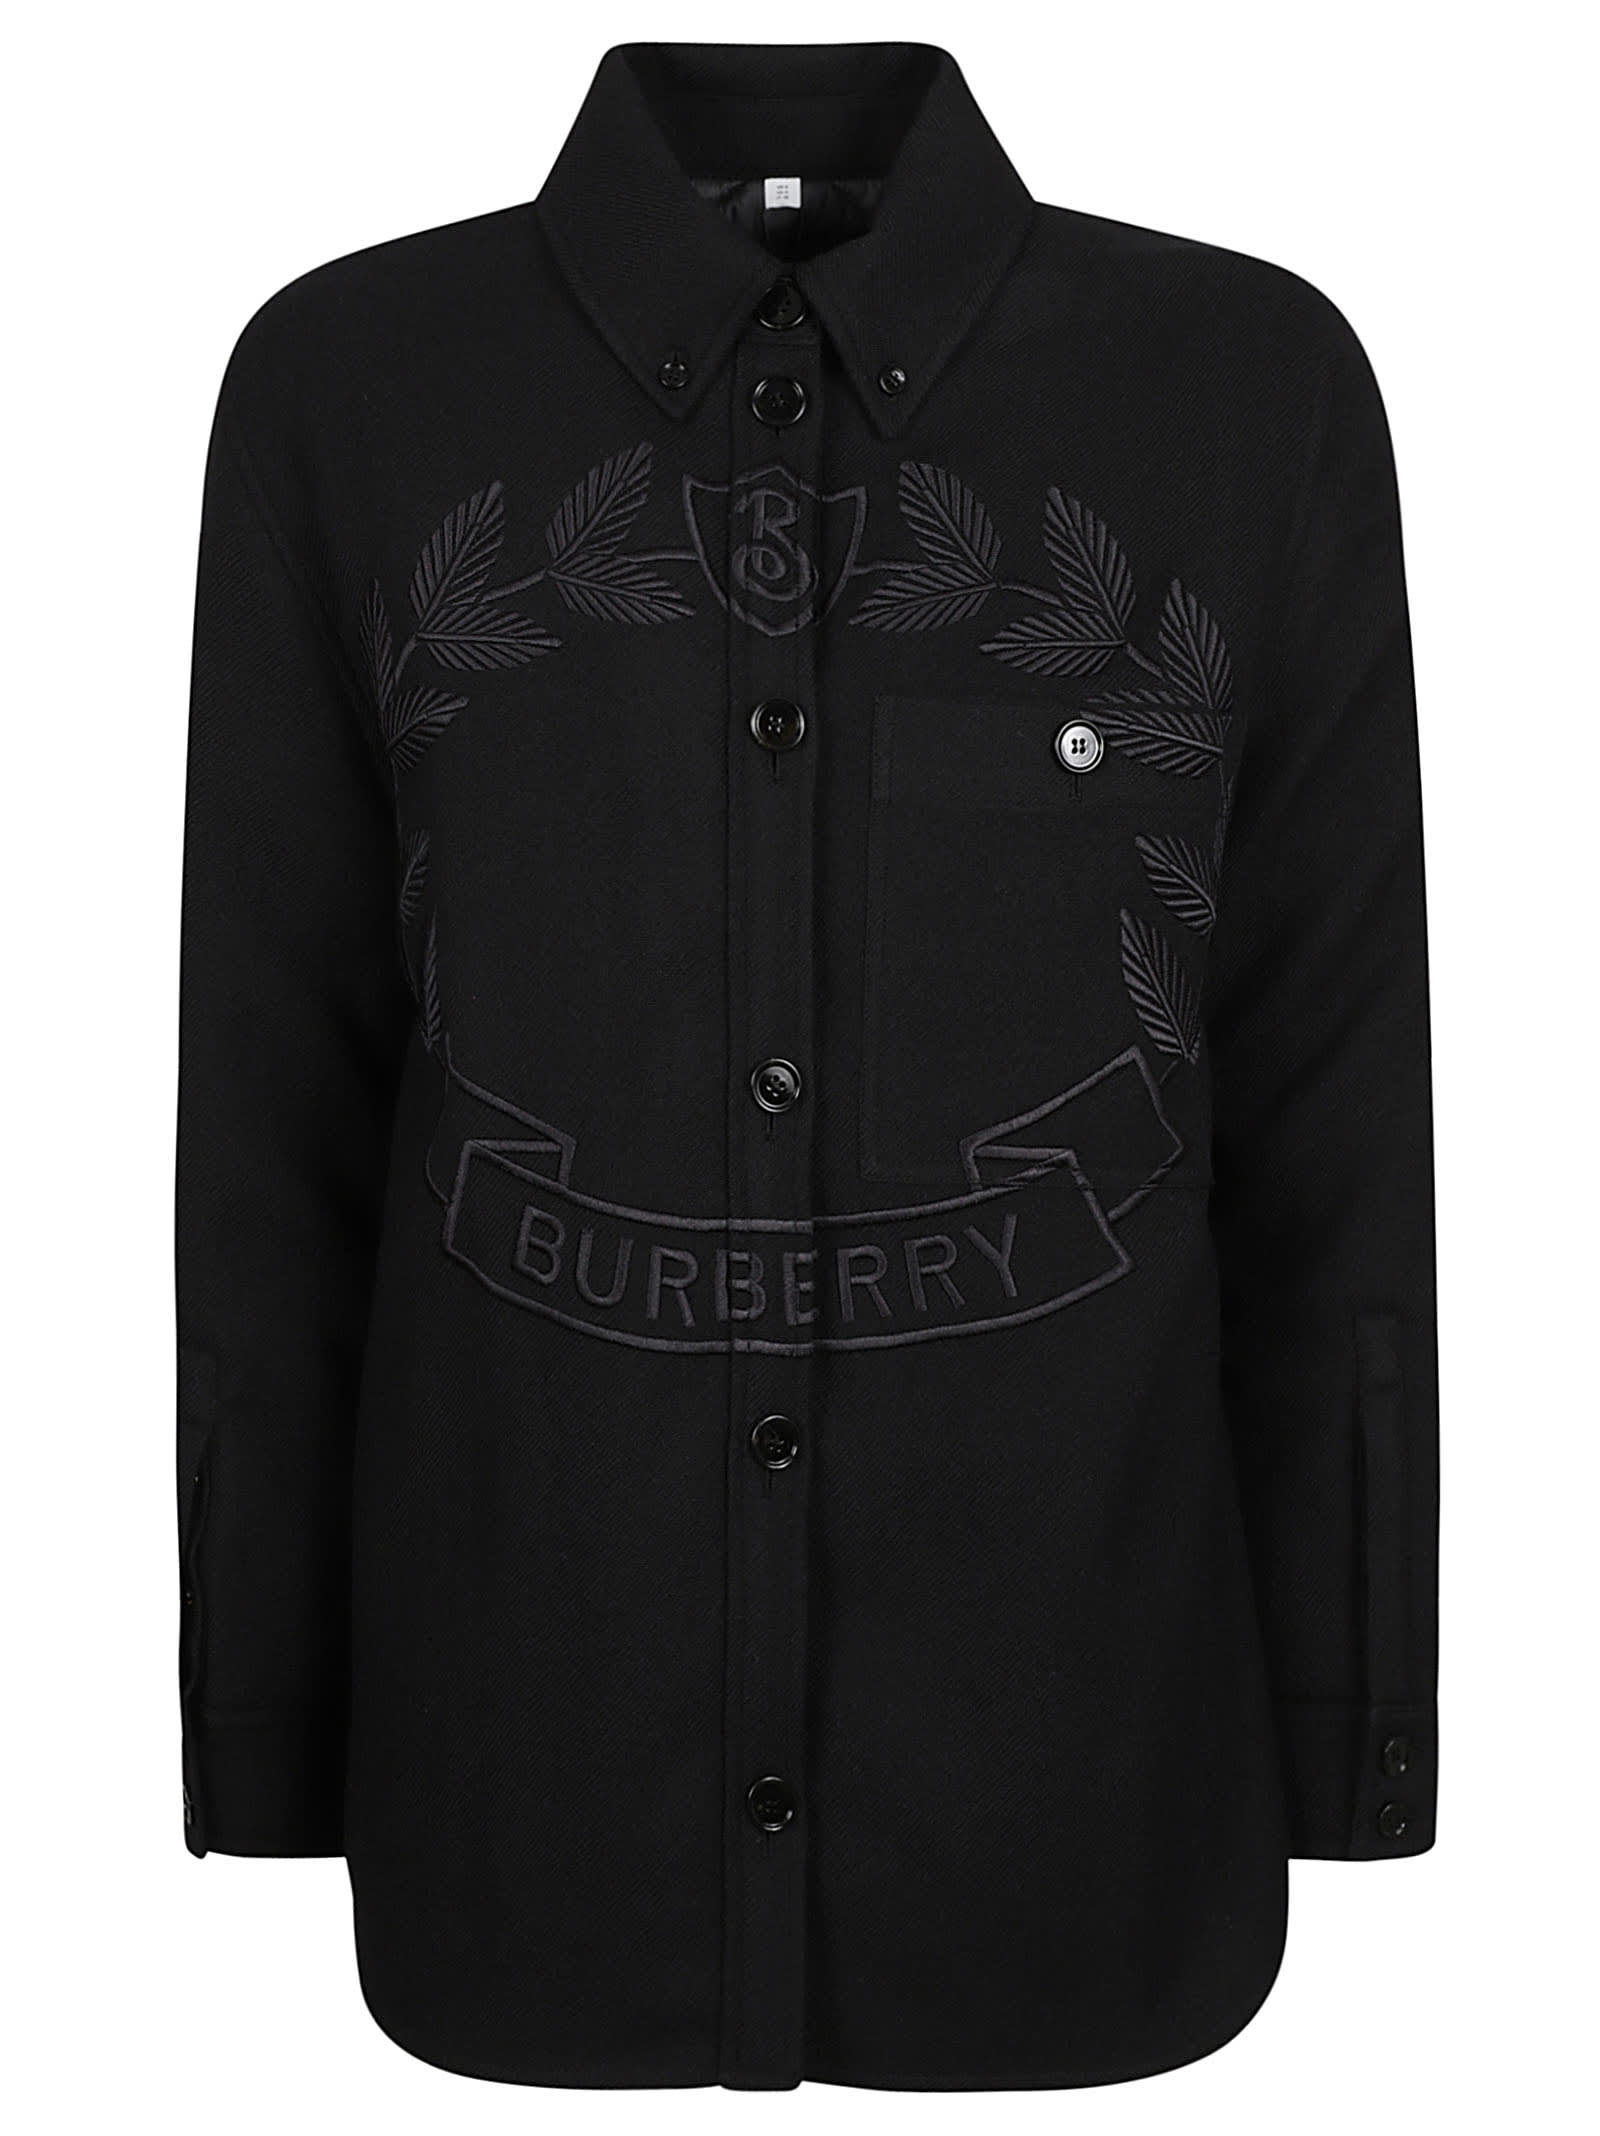 BURBERRY LOGO EMBROIDERED JACKET